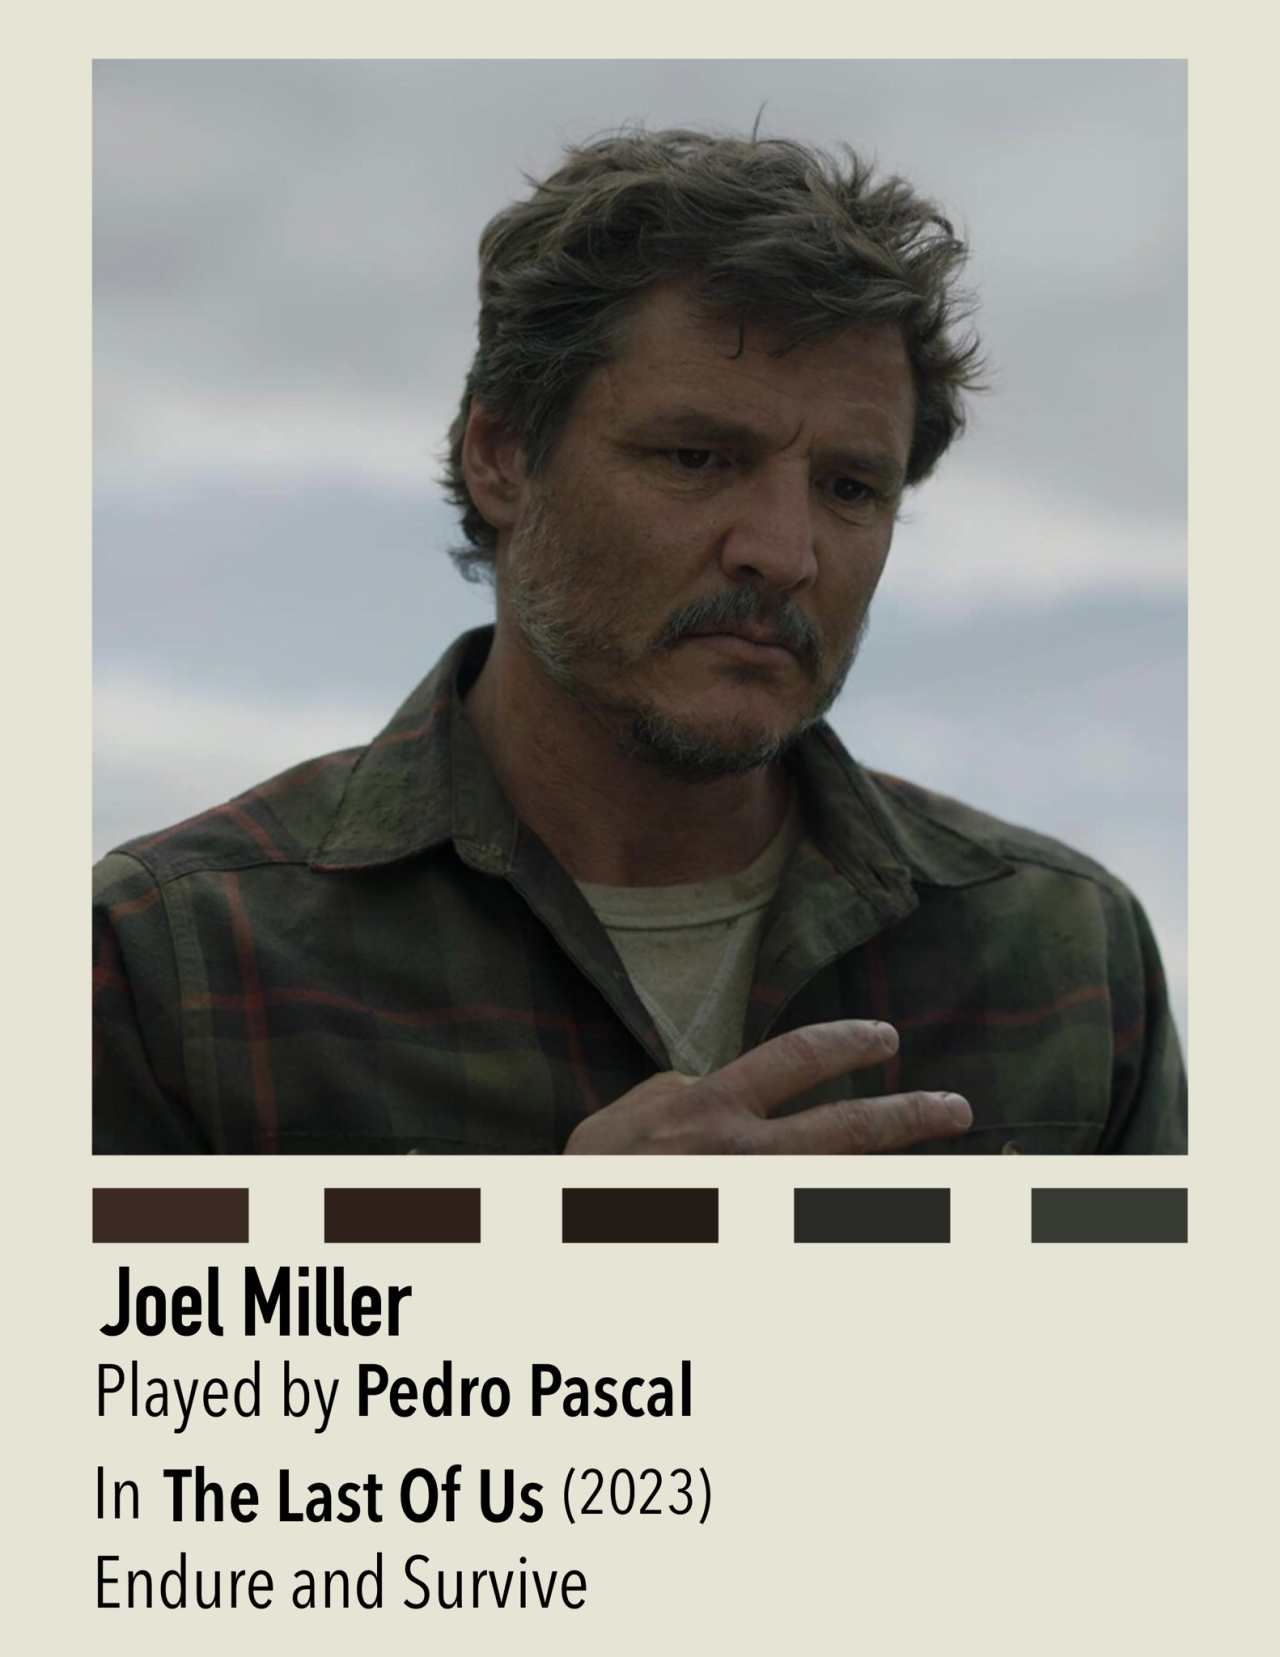 2023 - The Last of Us - Joel Miller - Pedro Pascal #pedropascal in 2023